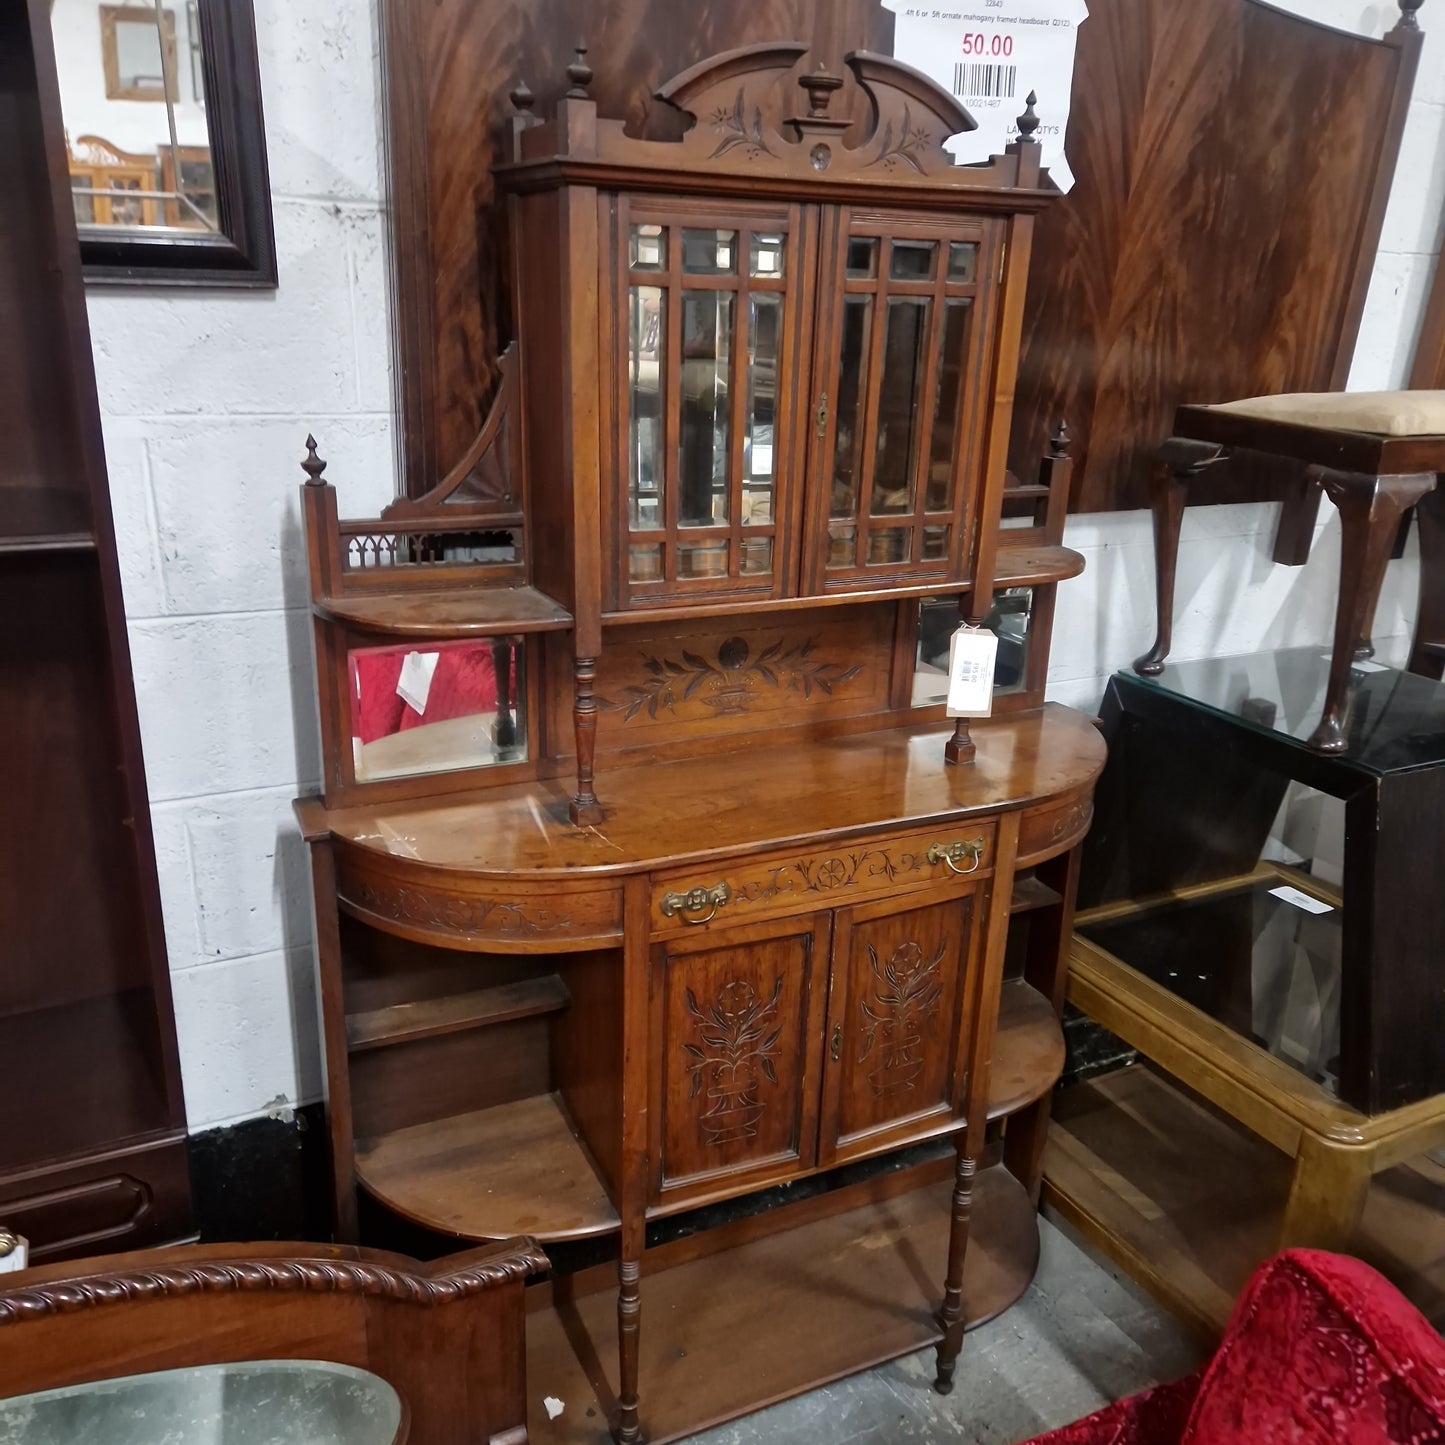 Antique Rosewood Side Cabinet Q3223
WAS 350.00
NOW 195.00